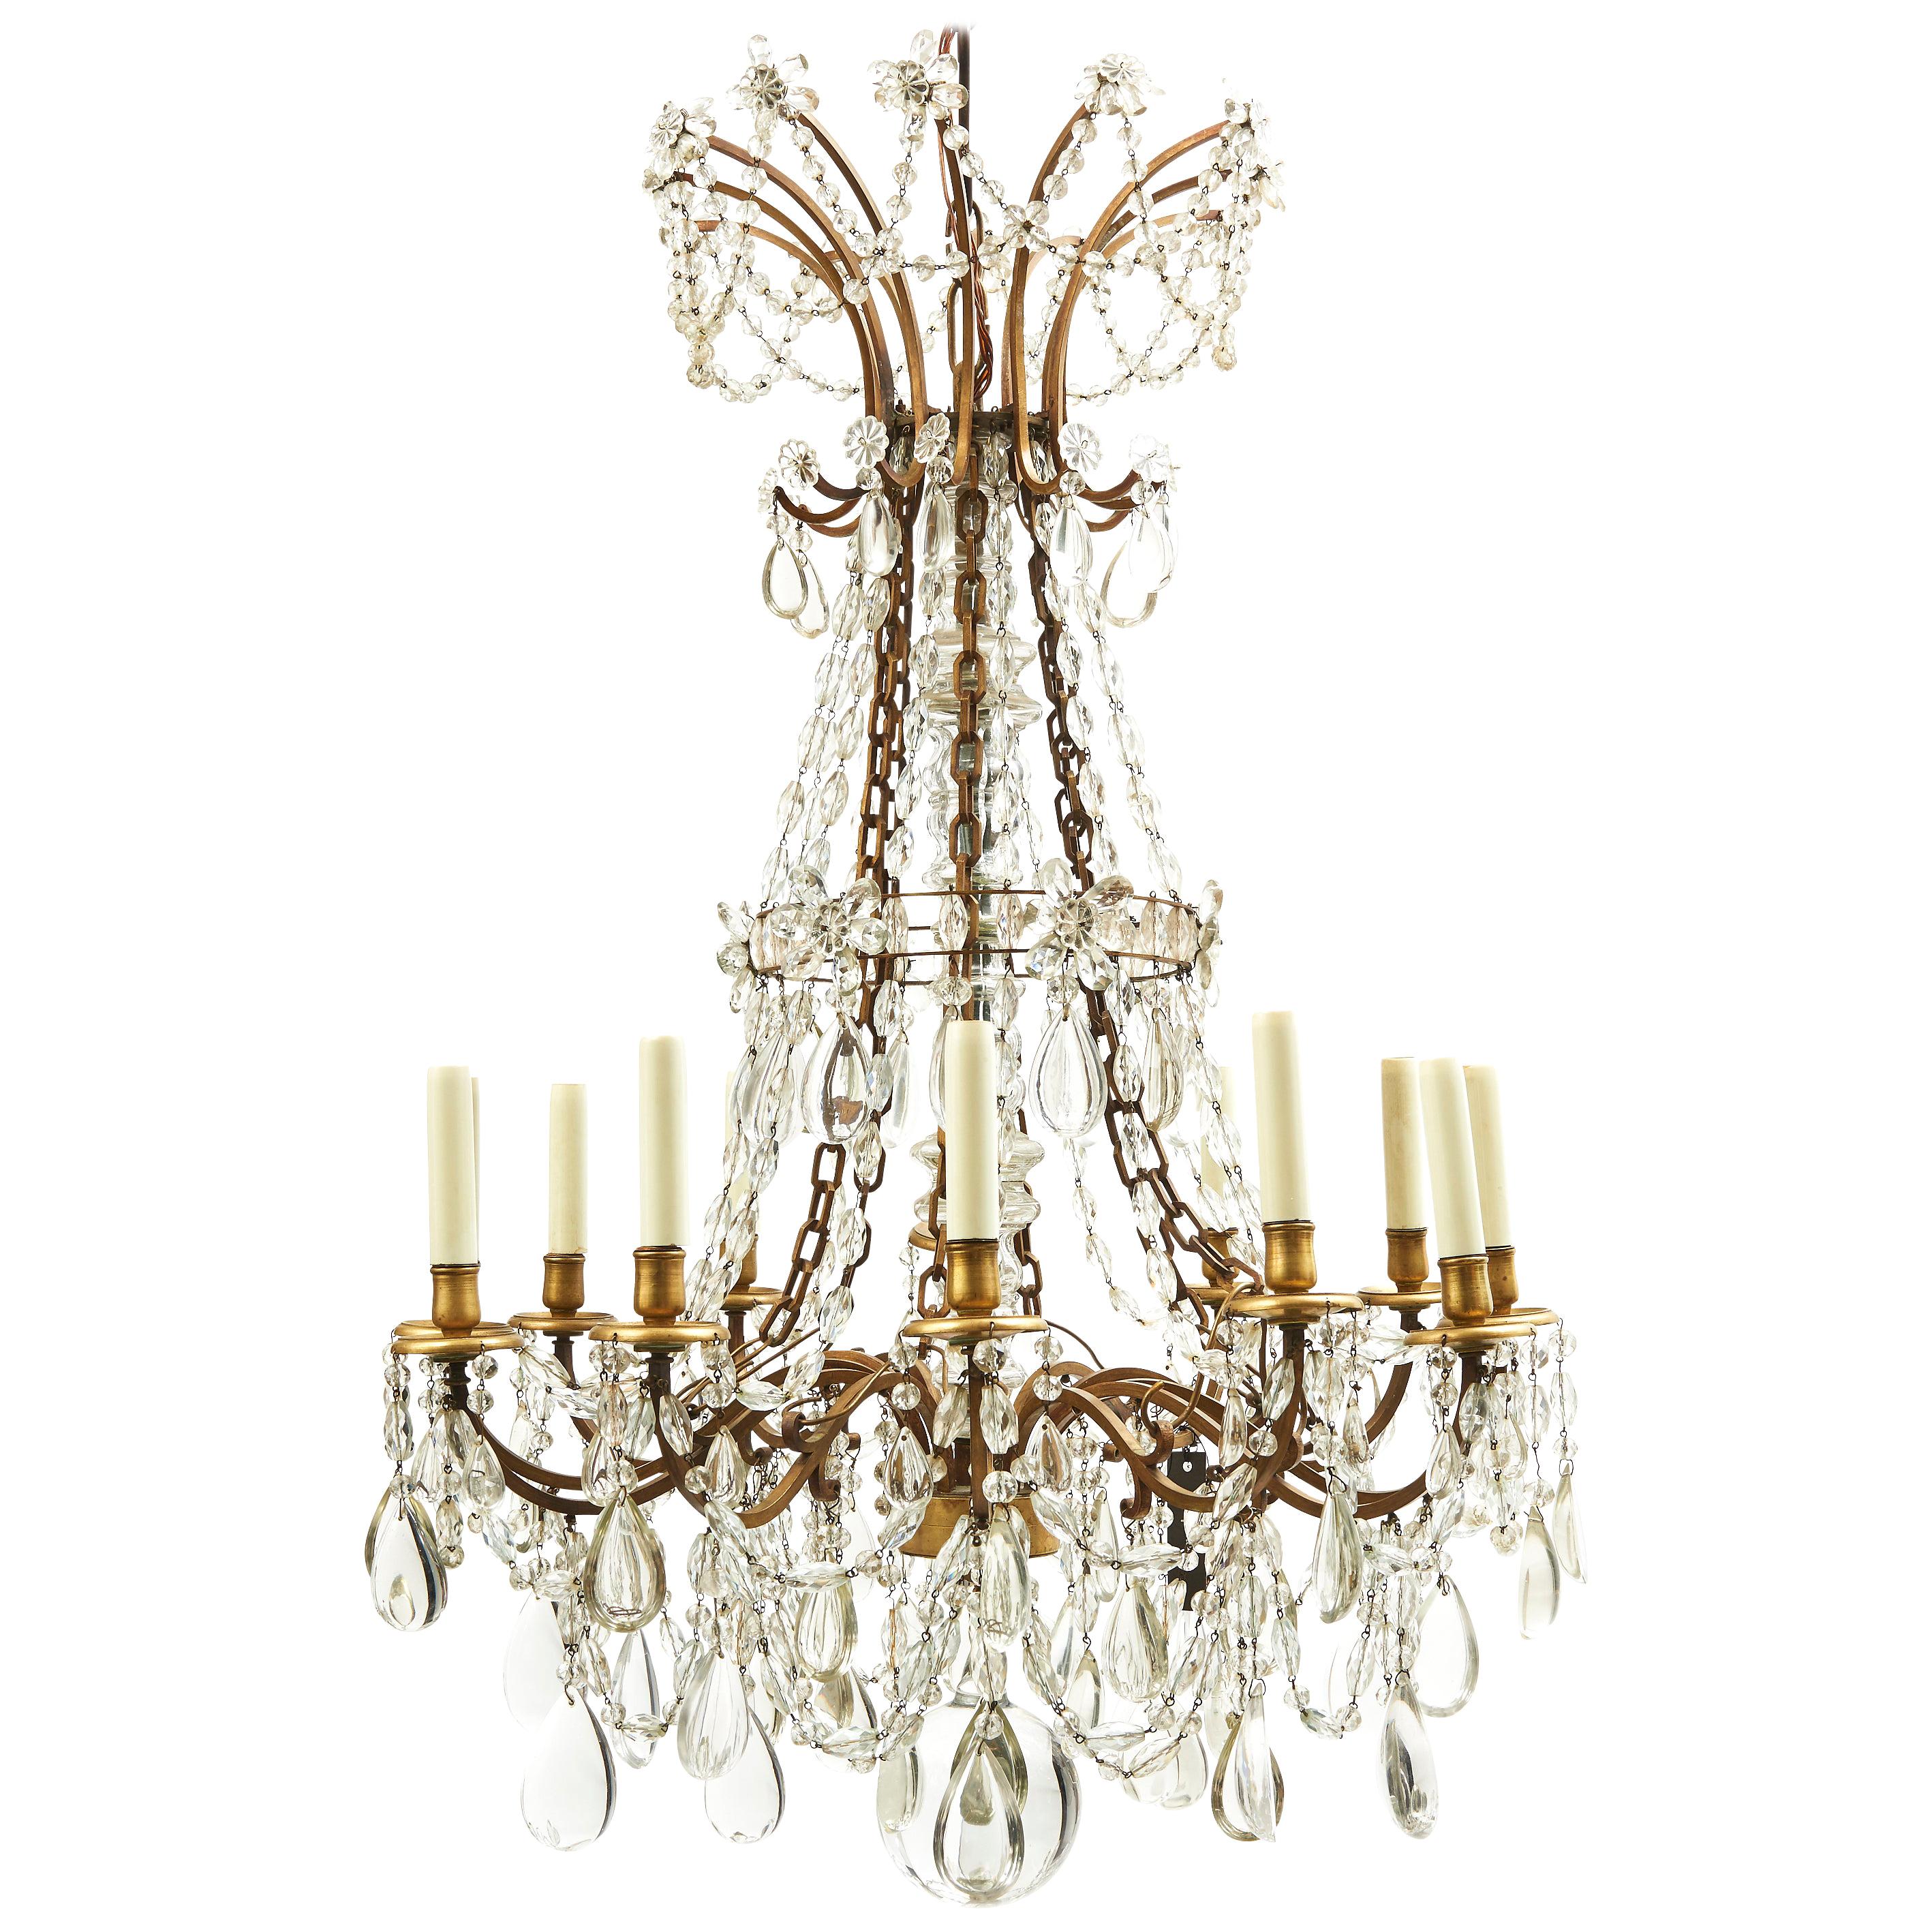 French Baccarat Style Cut Crystal Drop Twelve Light Chandelier, circa 1900 For Sale